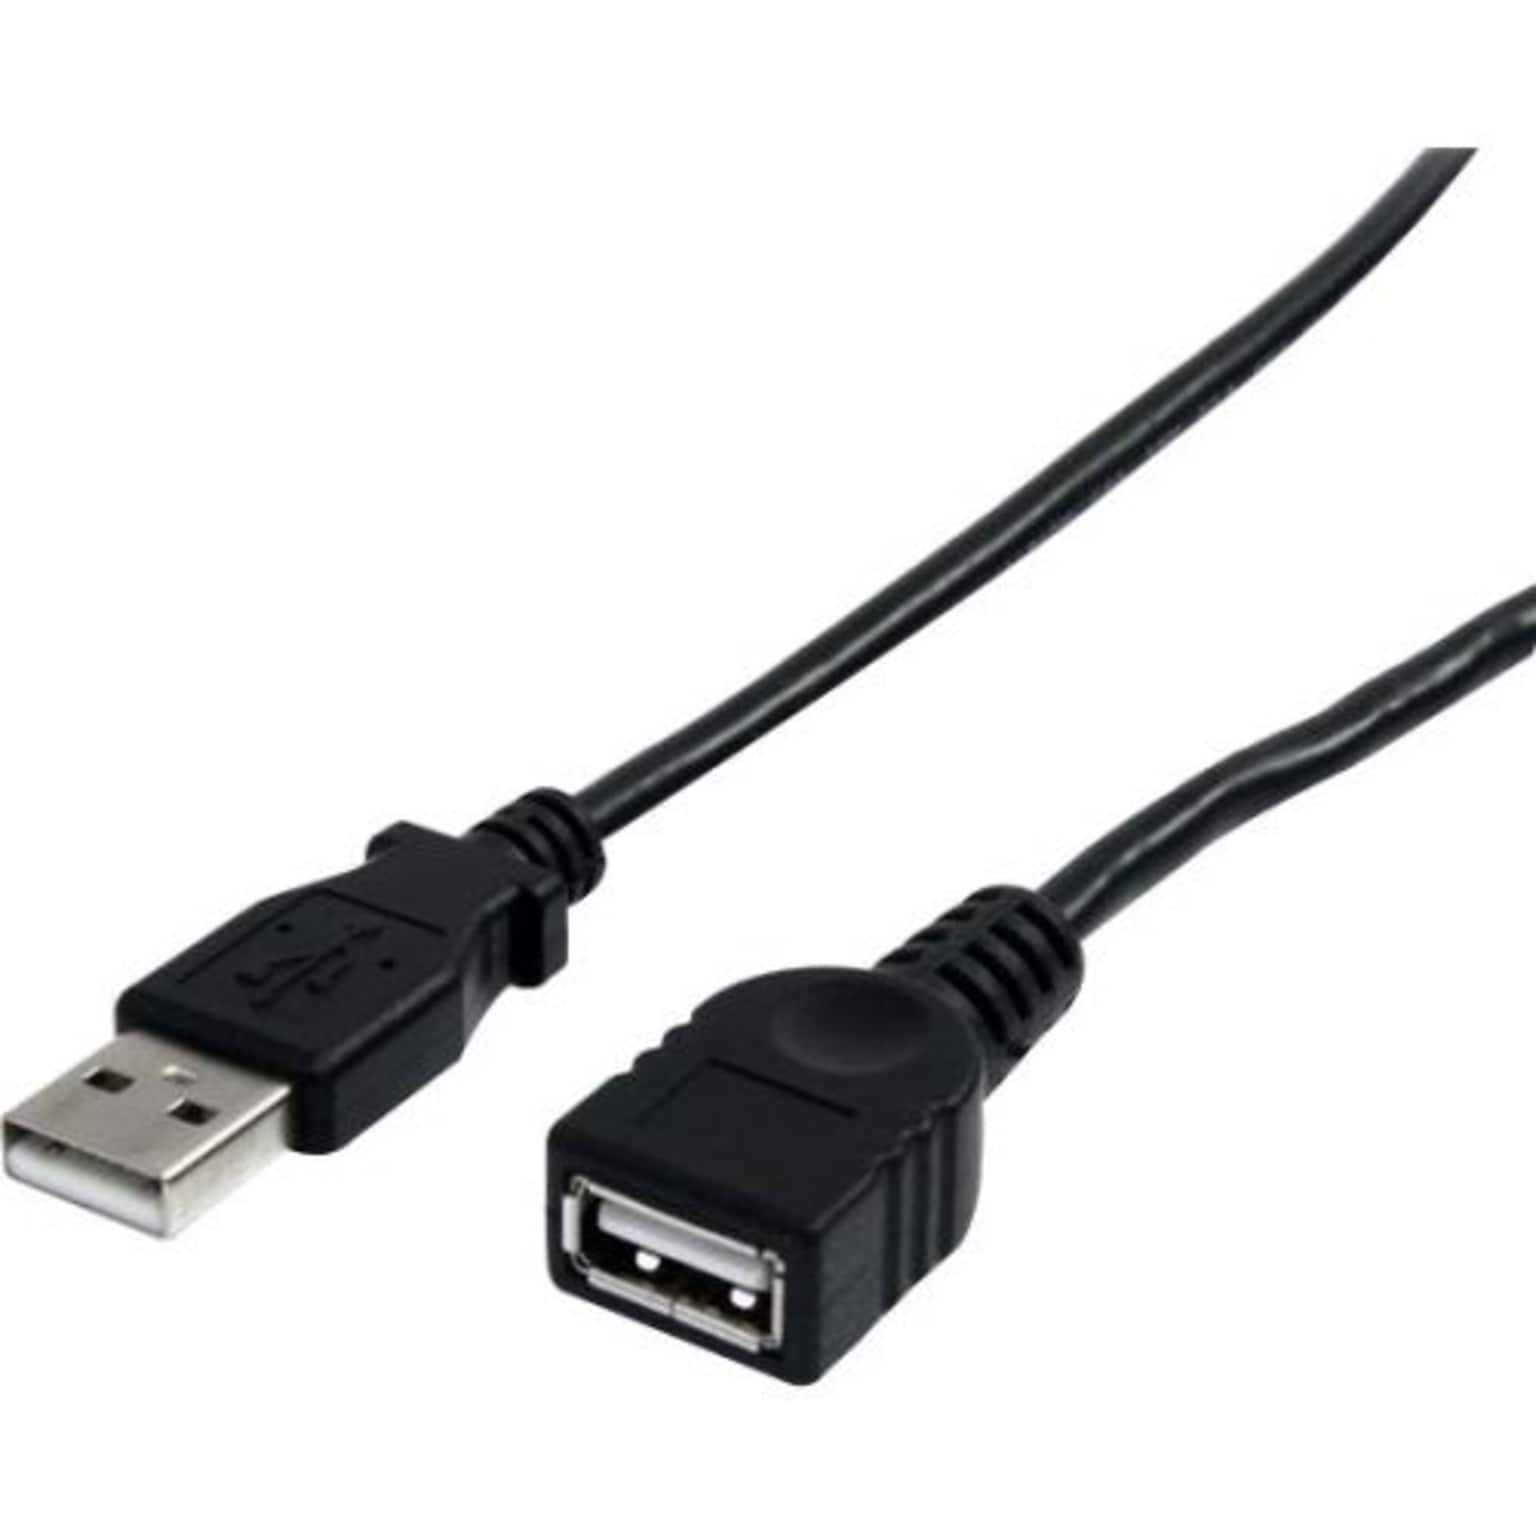 Startech 3 USB A Male to USB A Female Extension Cable; Black